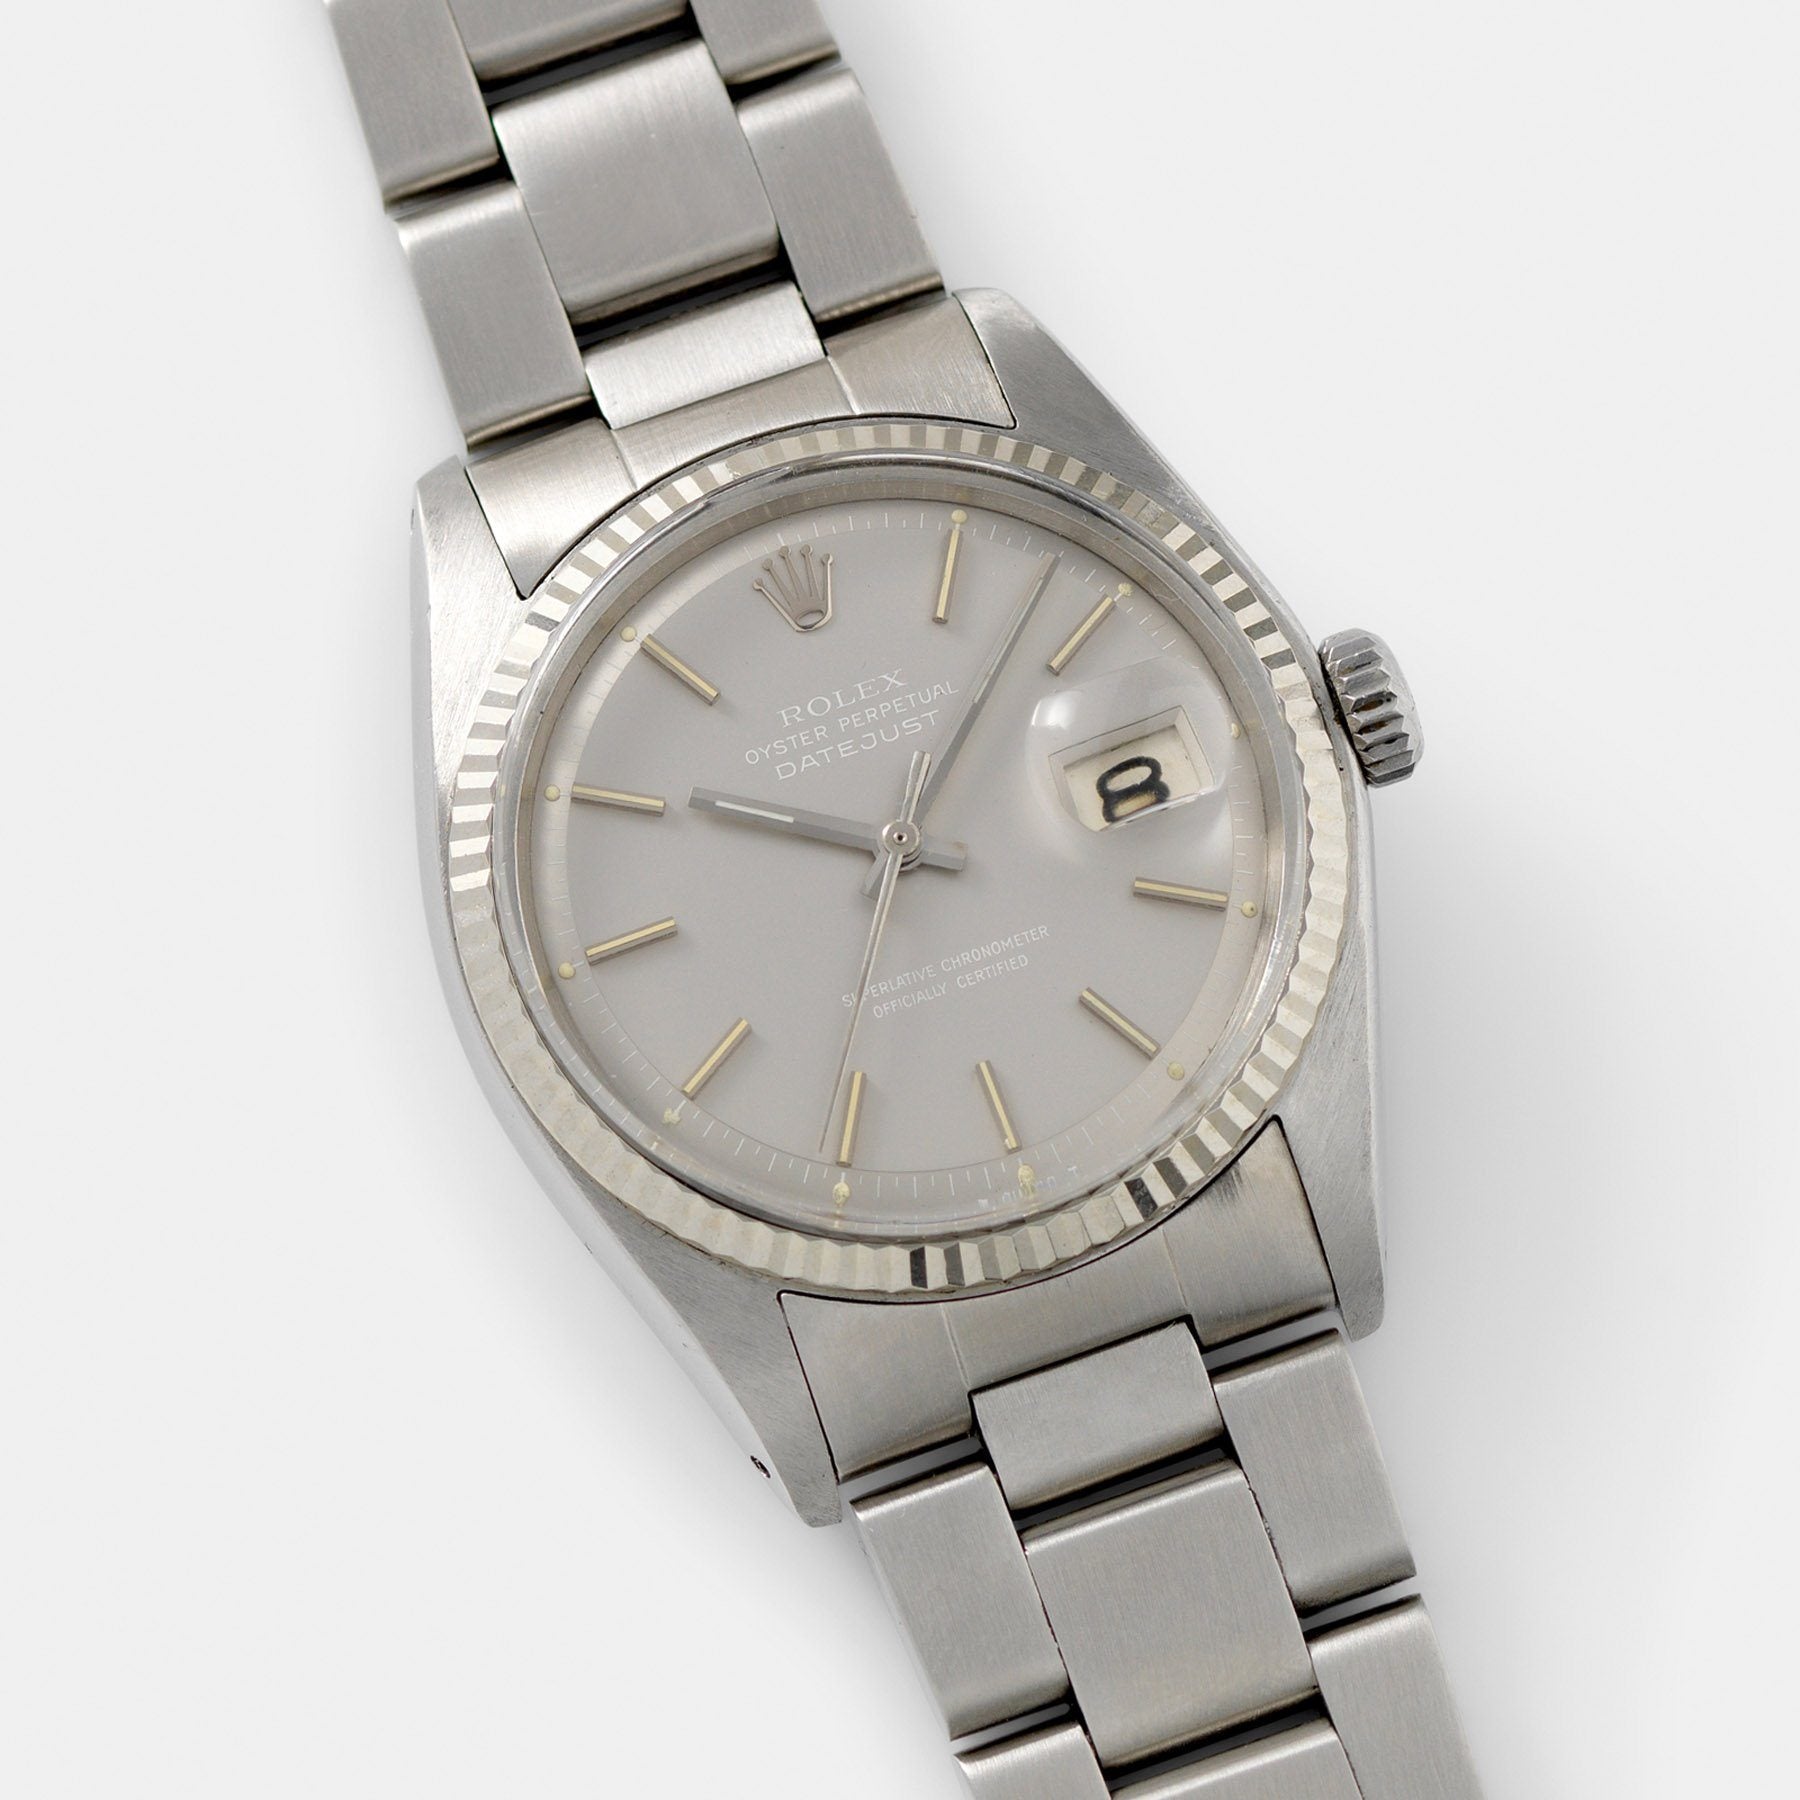 Rolex slow-set Datejust Ghost Dial 1601